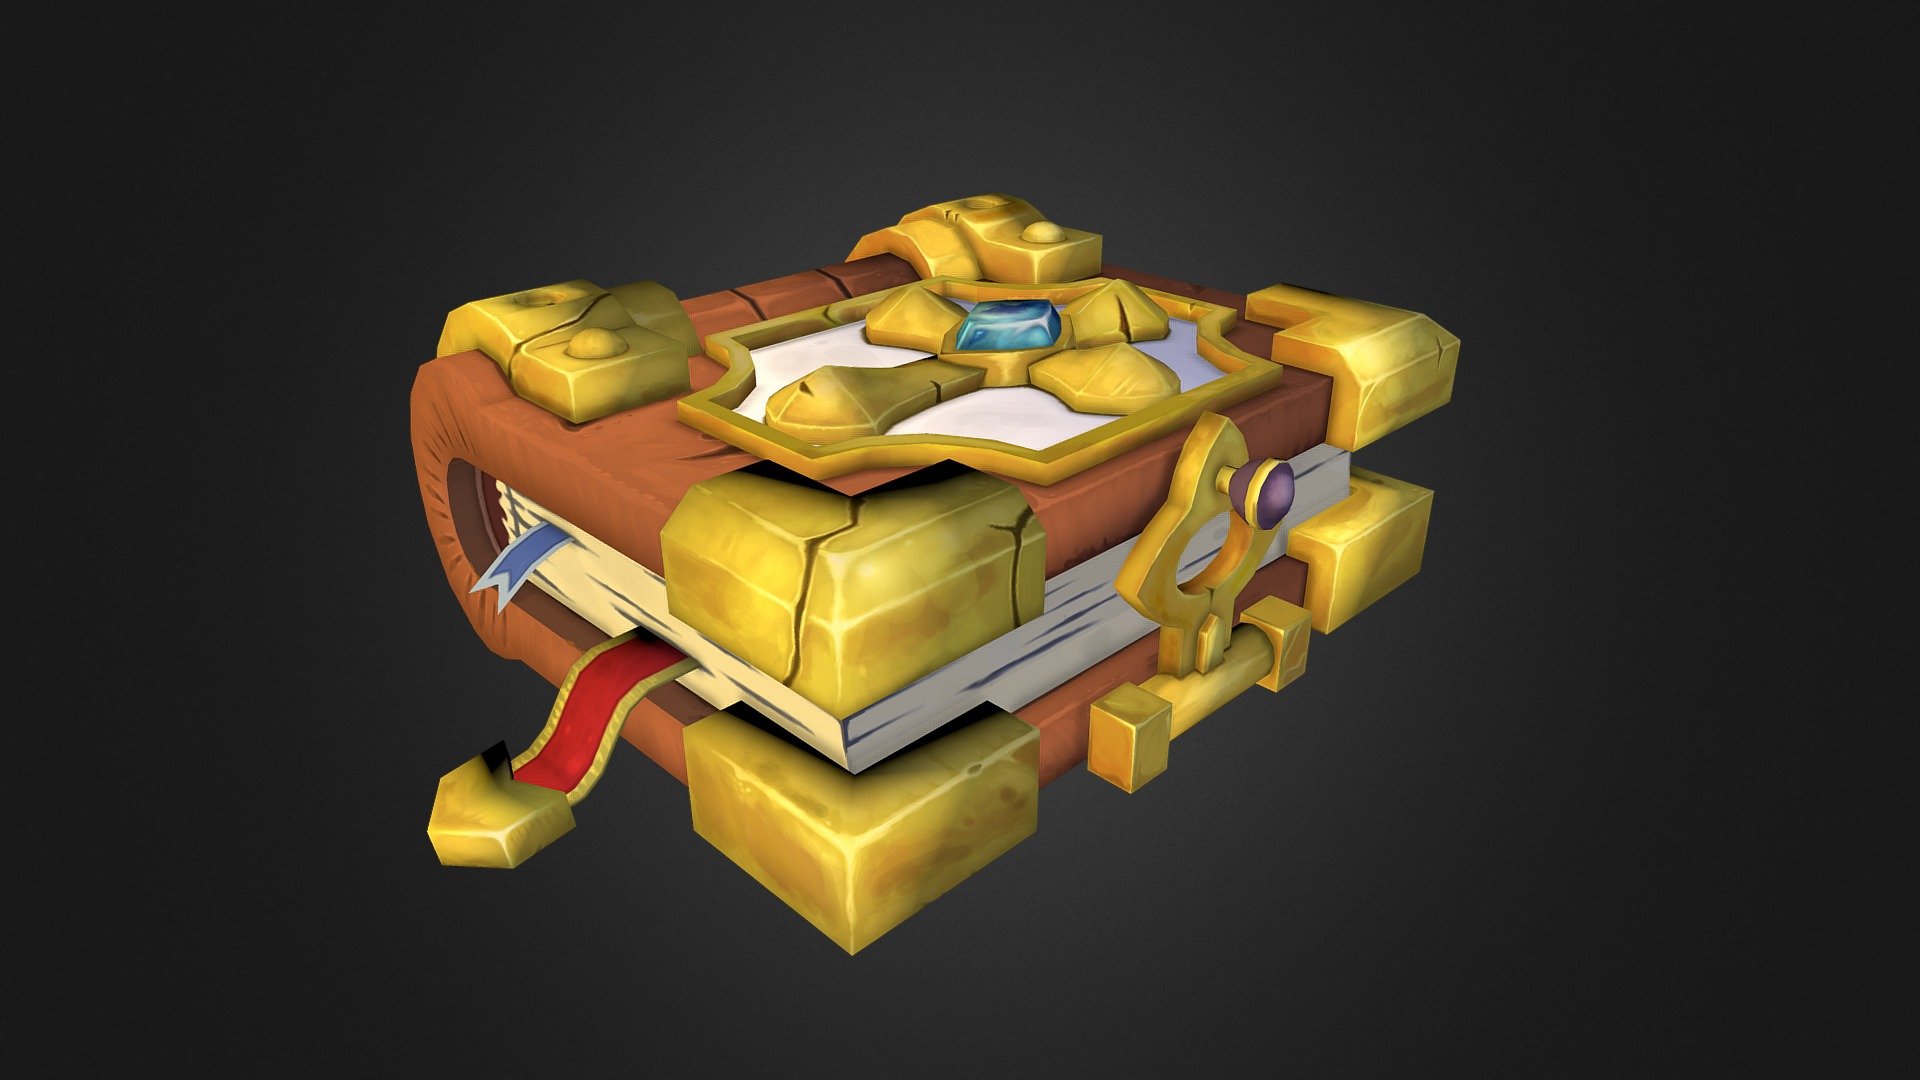 A handpainted model of a fantasy spellbook, done with Blender and Krita. Based on the Paladin Book by Arslan Shyriiev: https://www.artstation.com/artwork/wPDn6 - Paladin Book - 3D model by Liberi Arcano (@LiberiArcano) 3d model